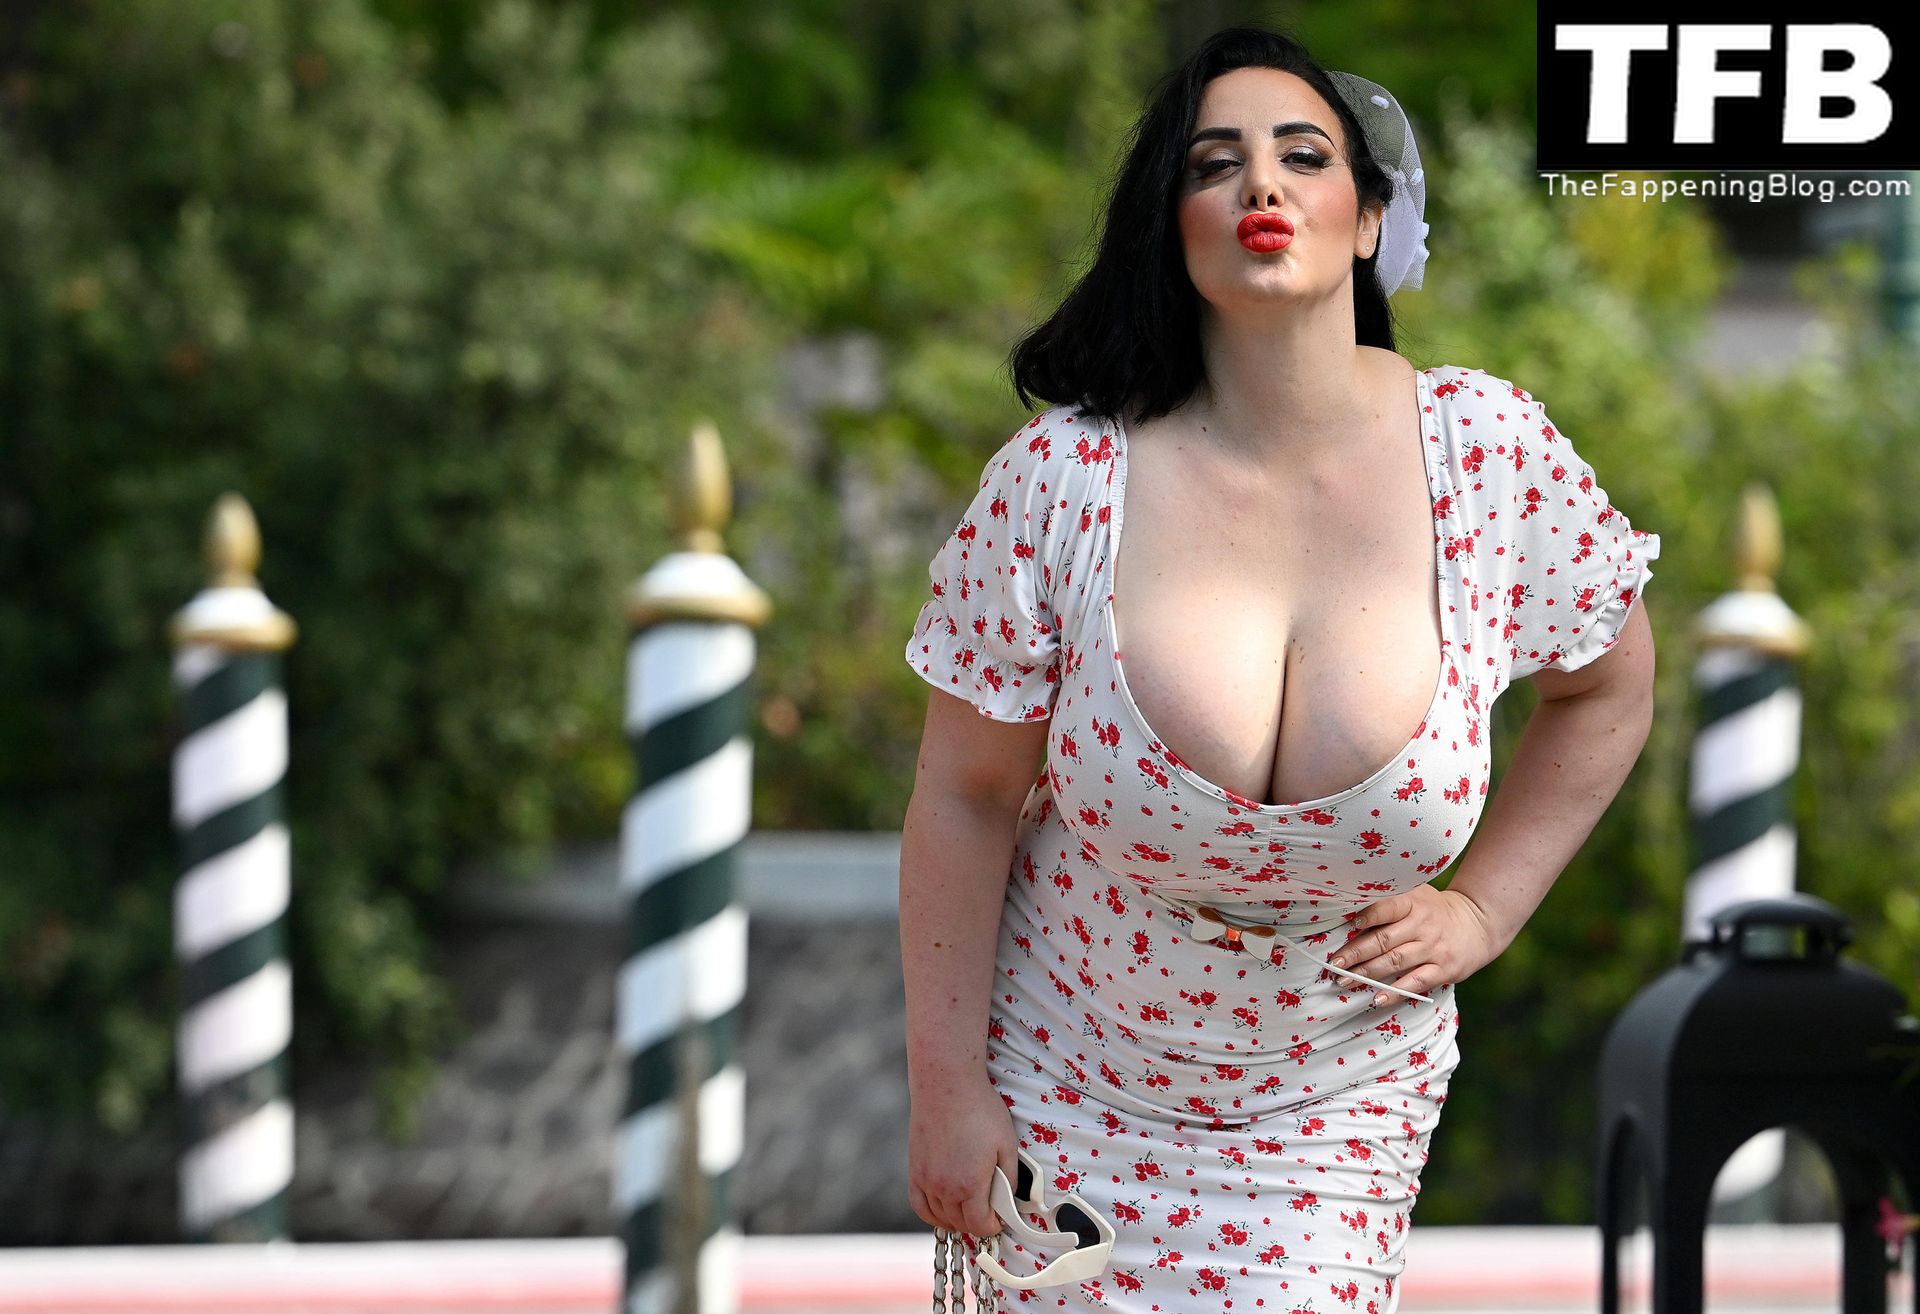 Francesca Giuliano Displays Her Huge Boobs as She Arrives at the Lido Beach in Venice (2 Photos)